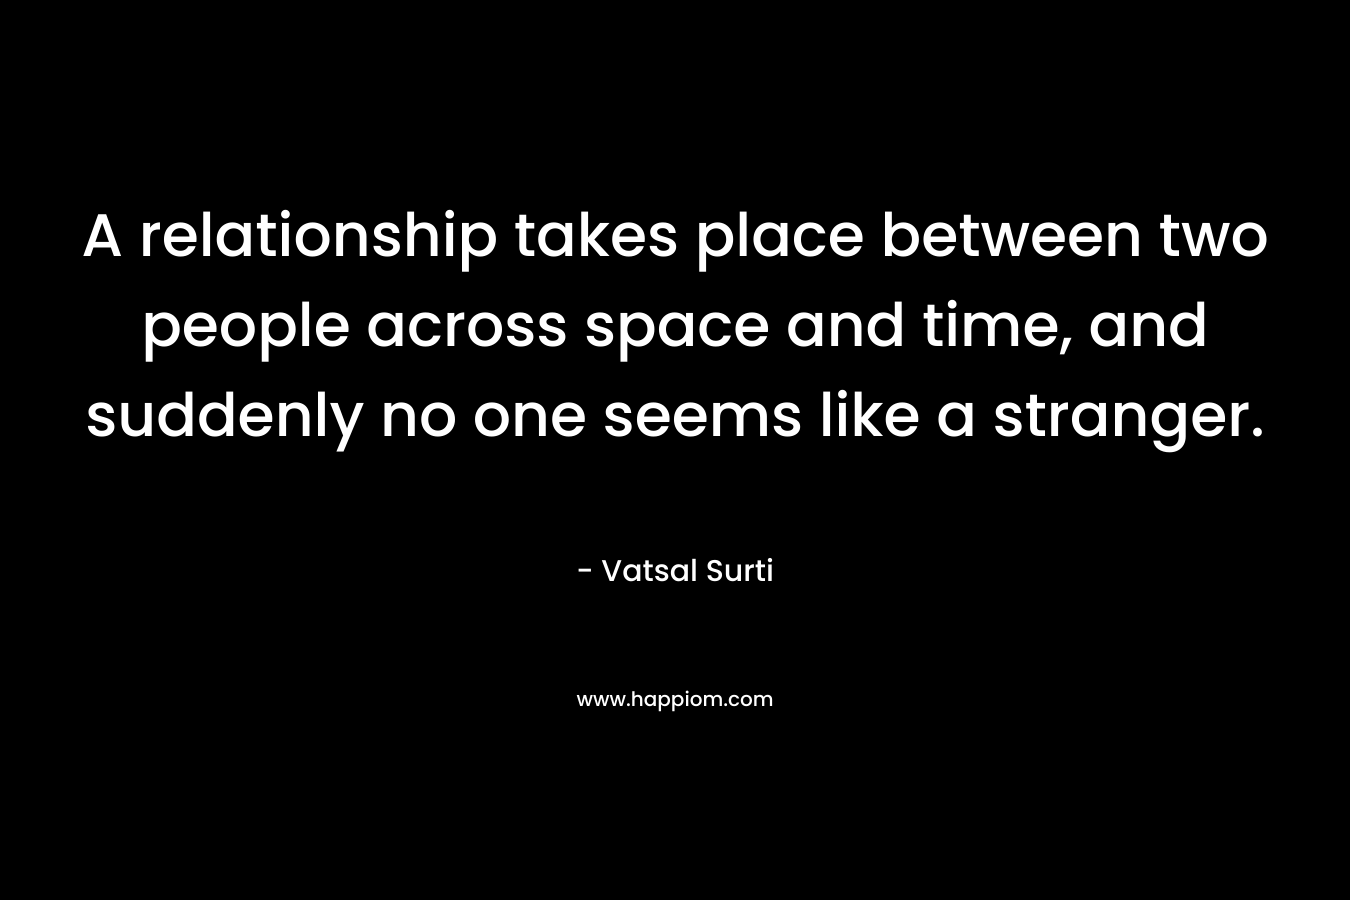 A relationship takes place between two people across space and time, and suddenly no one seems like a stranger. – Vatsal Surti